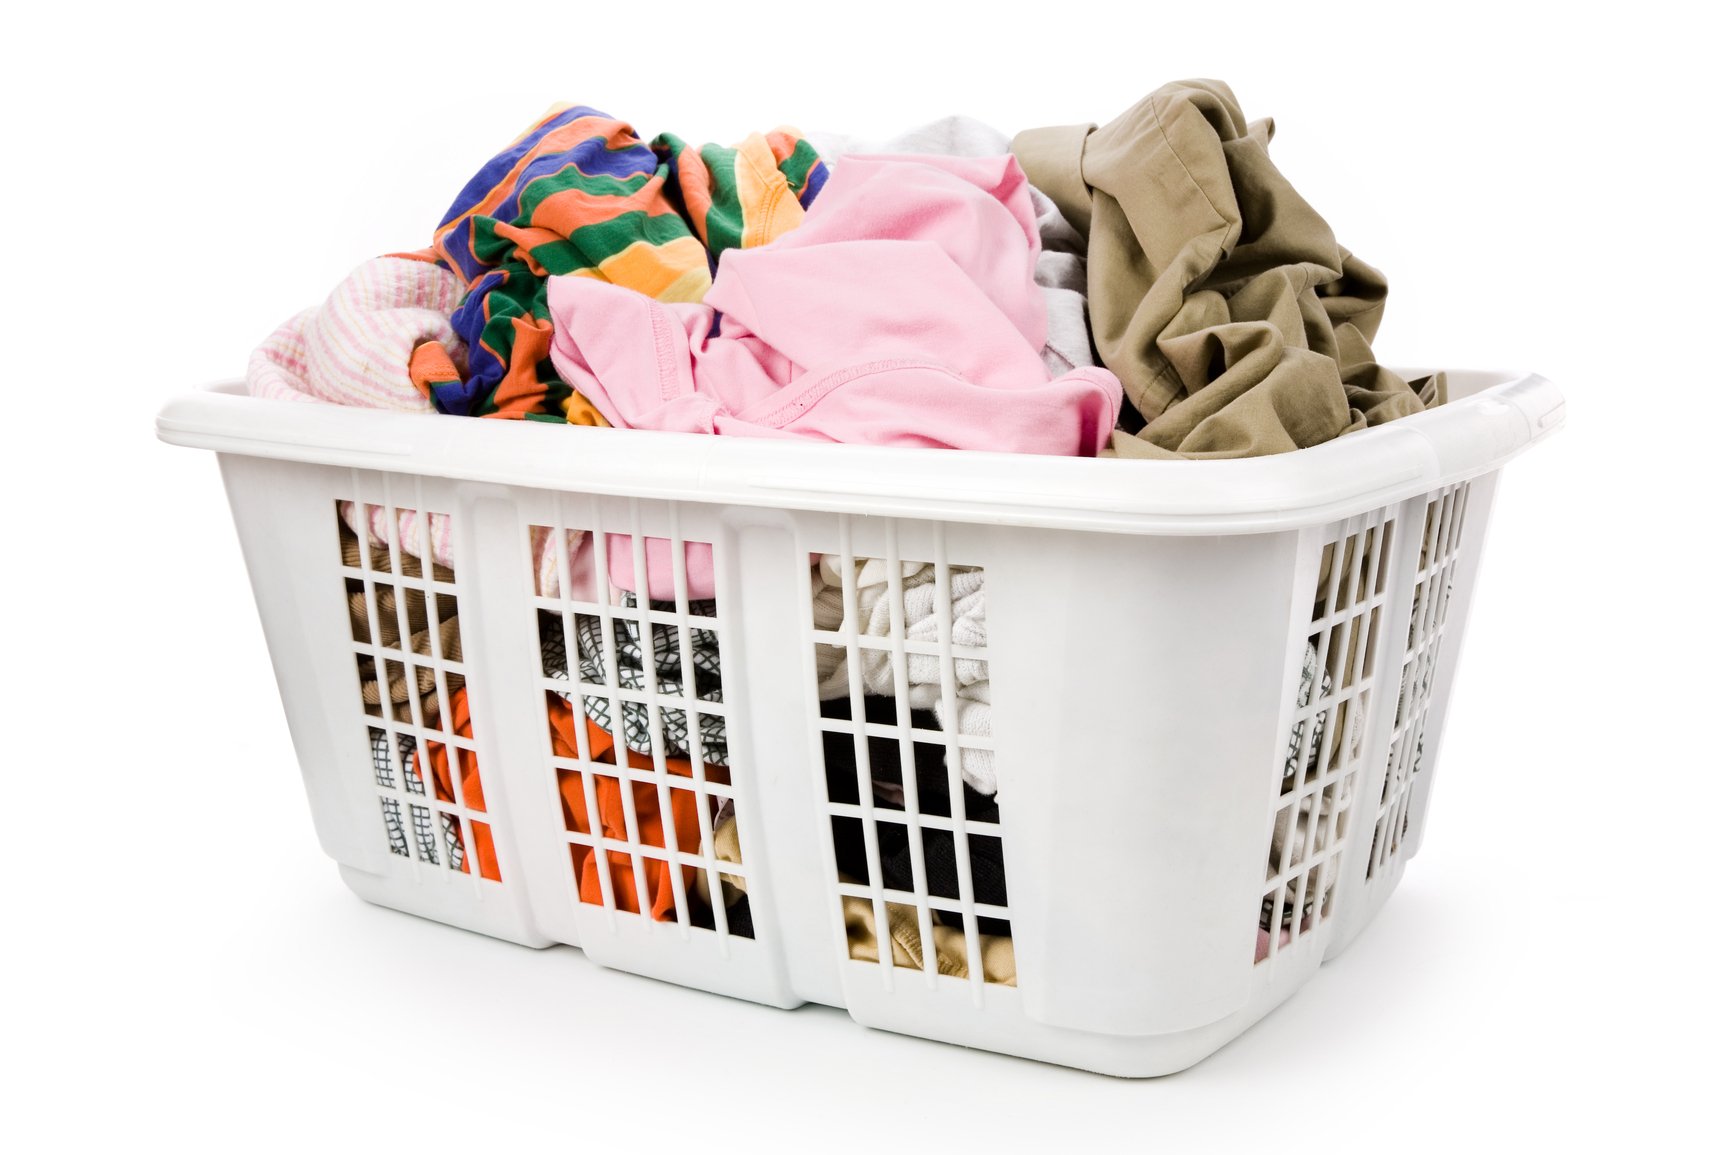 Laundry Hamper for Kids. Take Dirty clothes from the Hamper. Hamper stuffing Filler Red. Грязная корзина турк